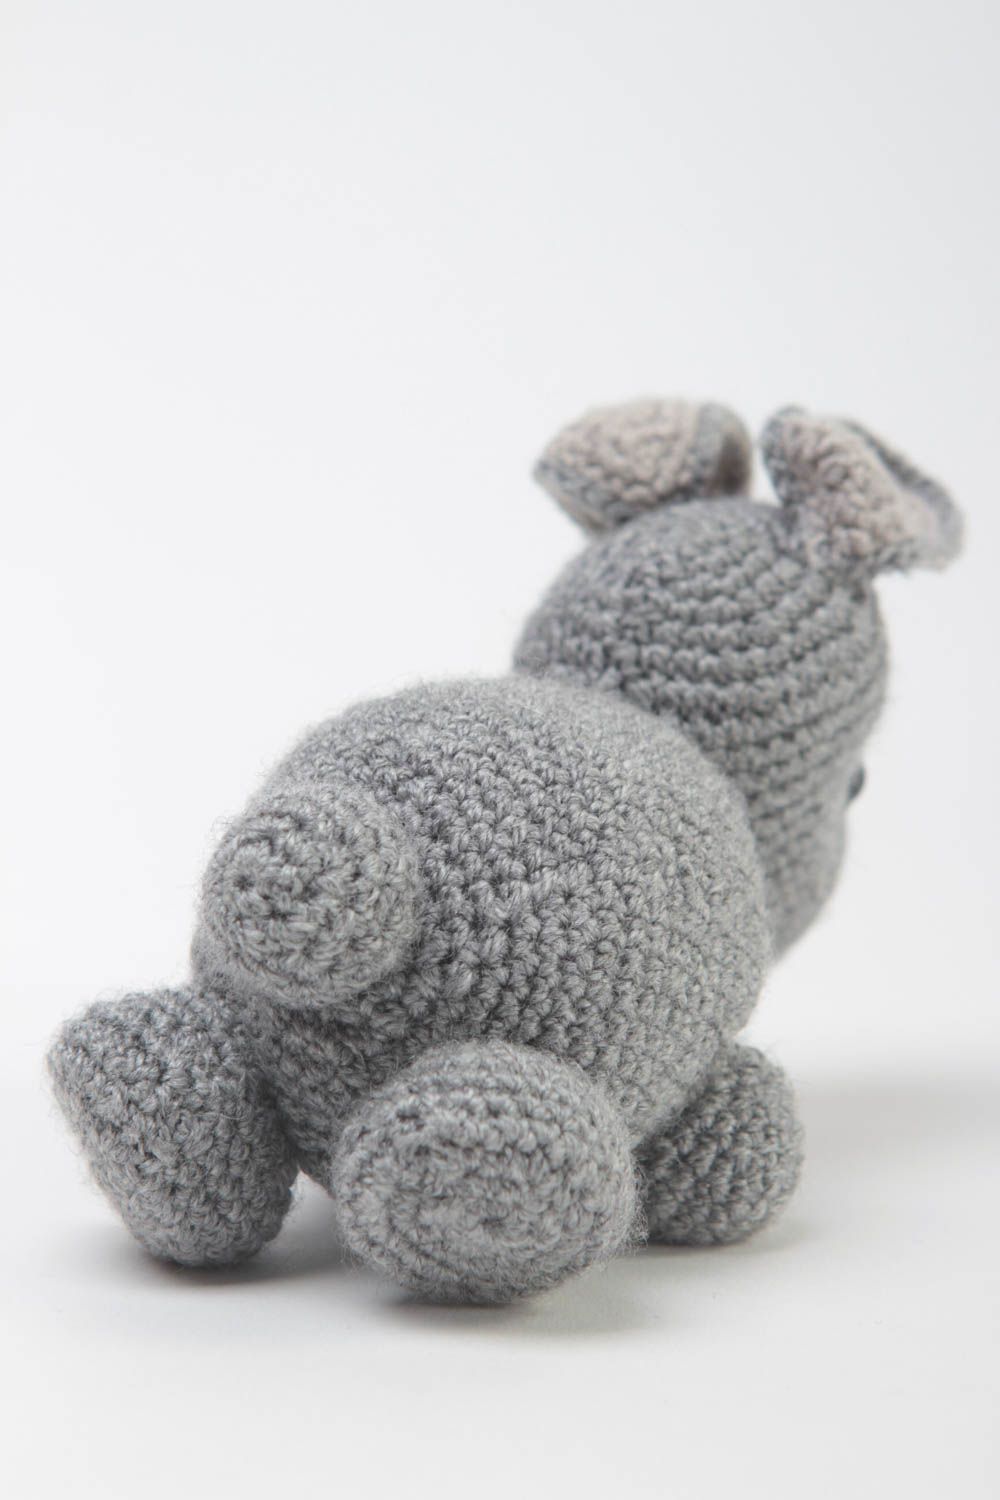 Crocheted handmade soft toy cute gifts for children animal toy rabbit photo 4